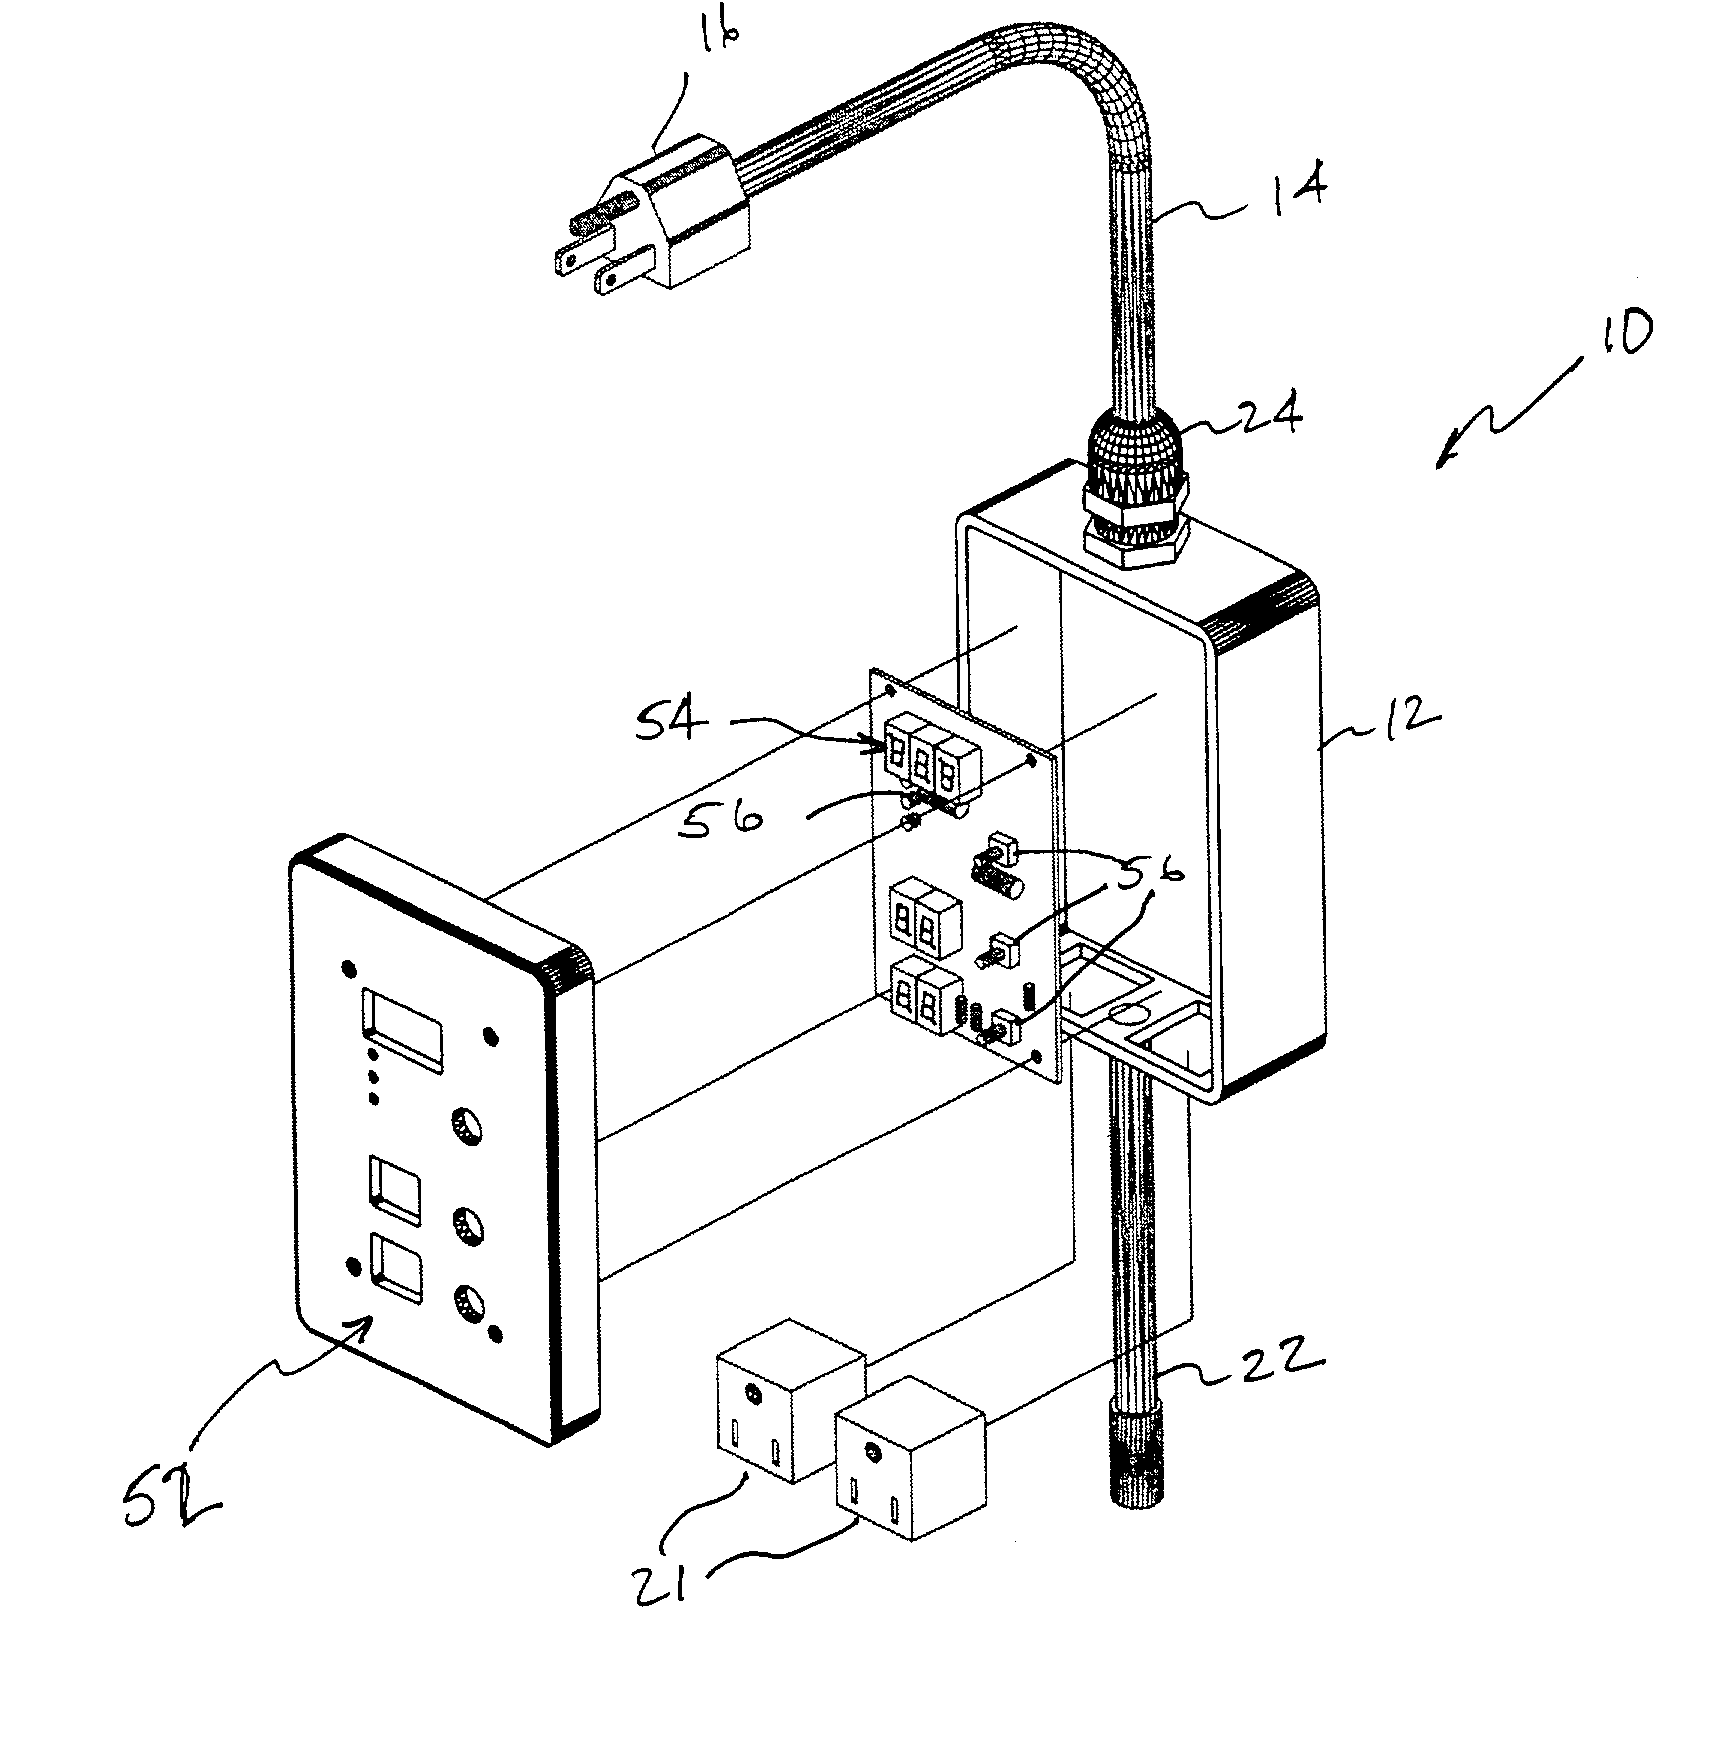 Electronic control for heating apparatus